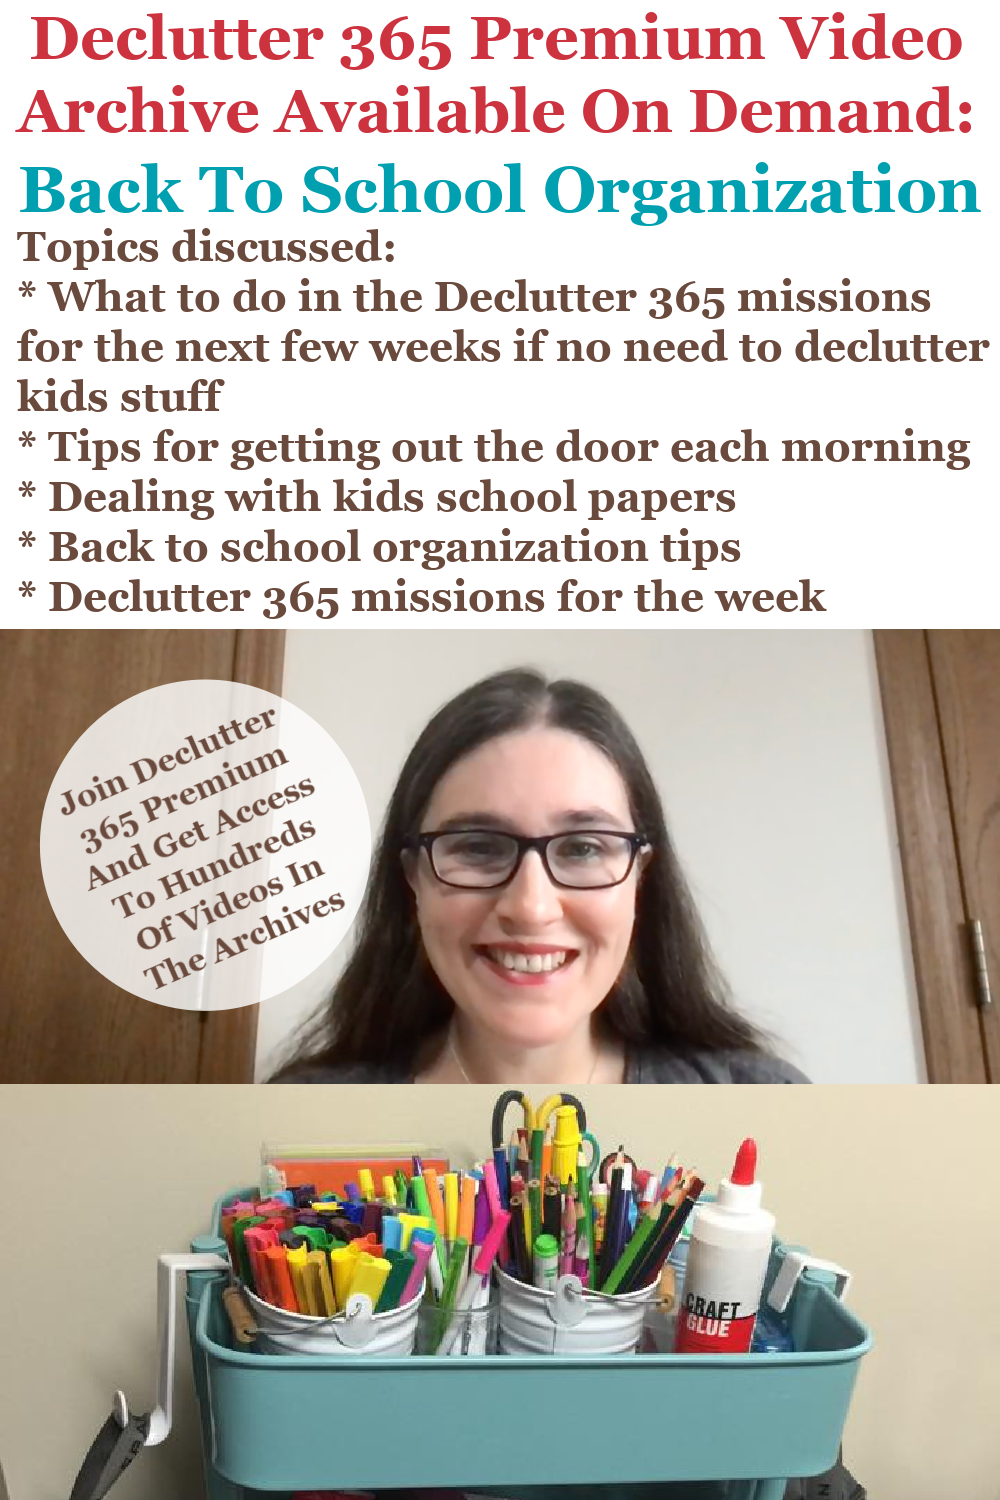 Declutter 365 Premium video archive available on demand all about back to school organization, on Home Storage Solutions 101